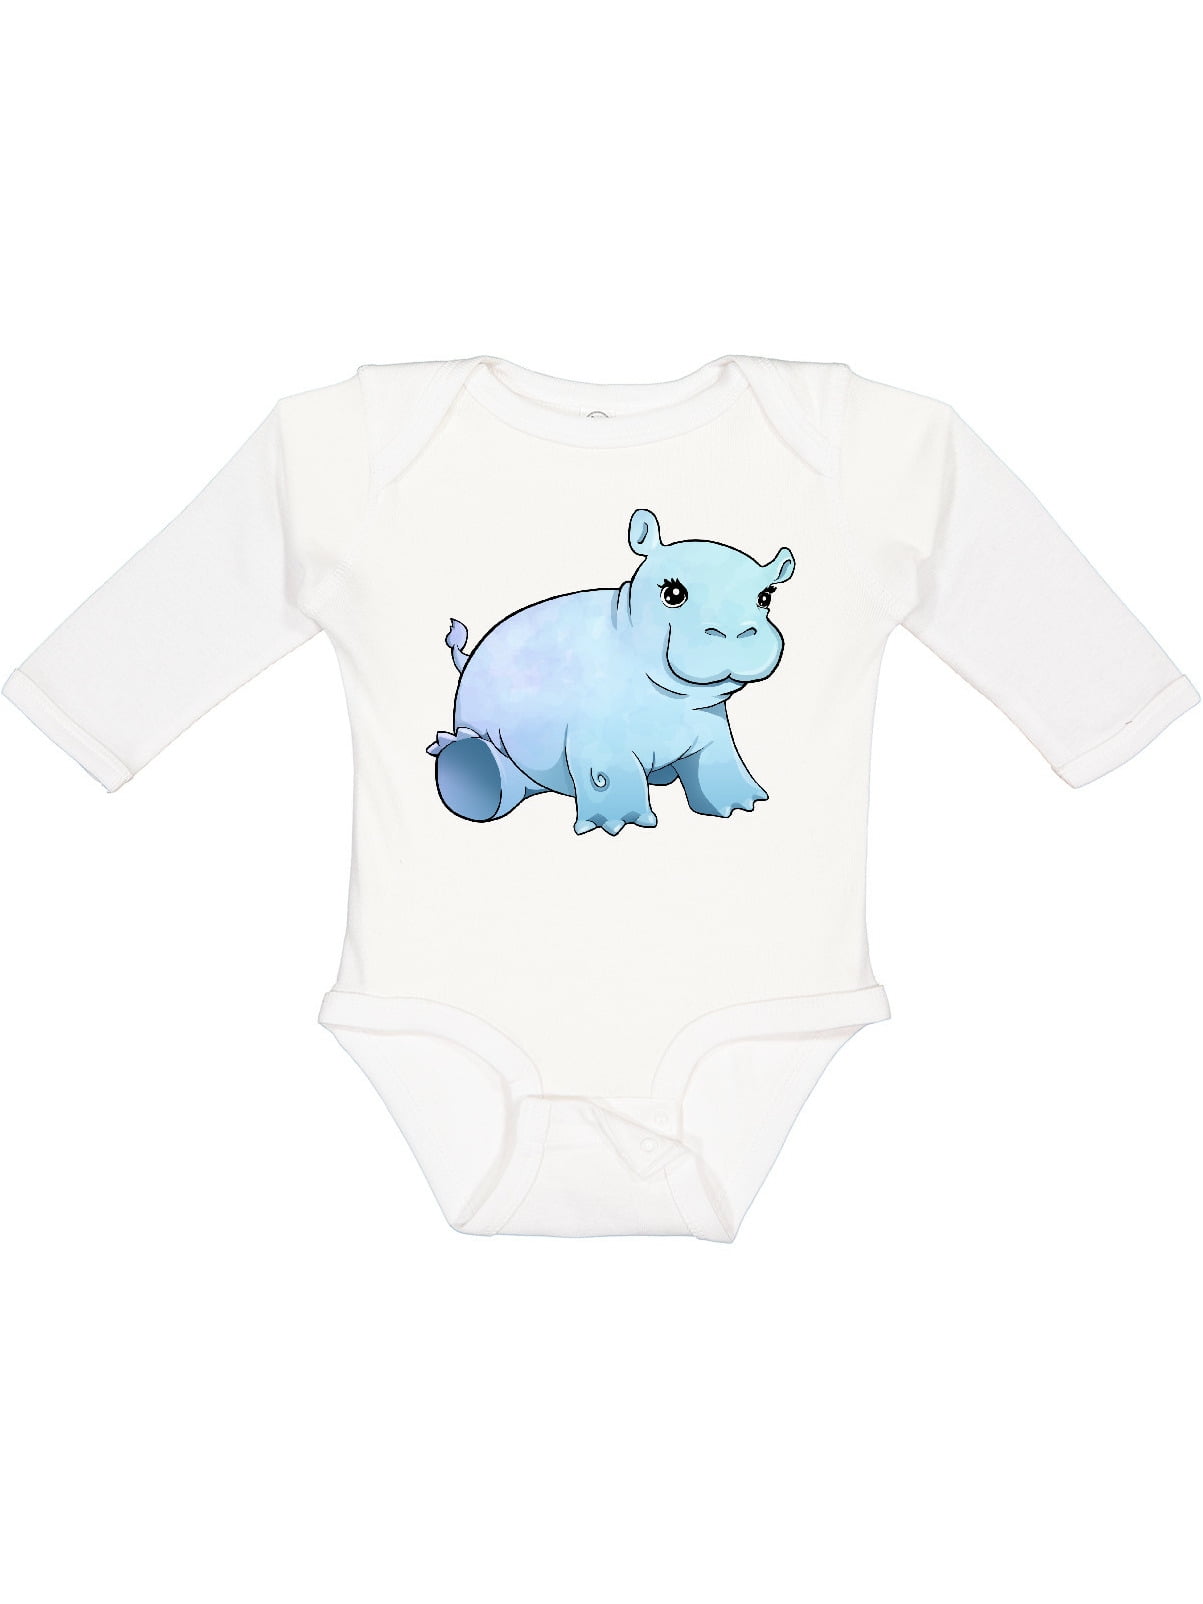 4 baby boy animal onsies toppers by Sharon Poore 